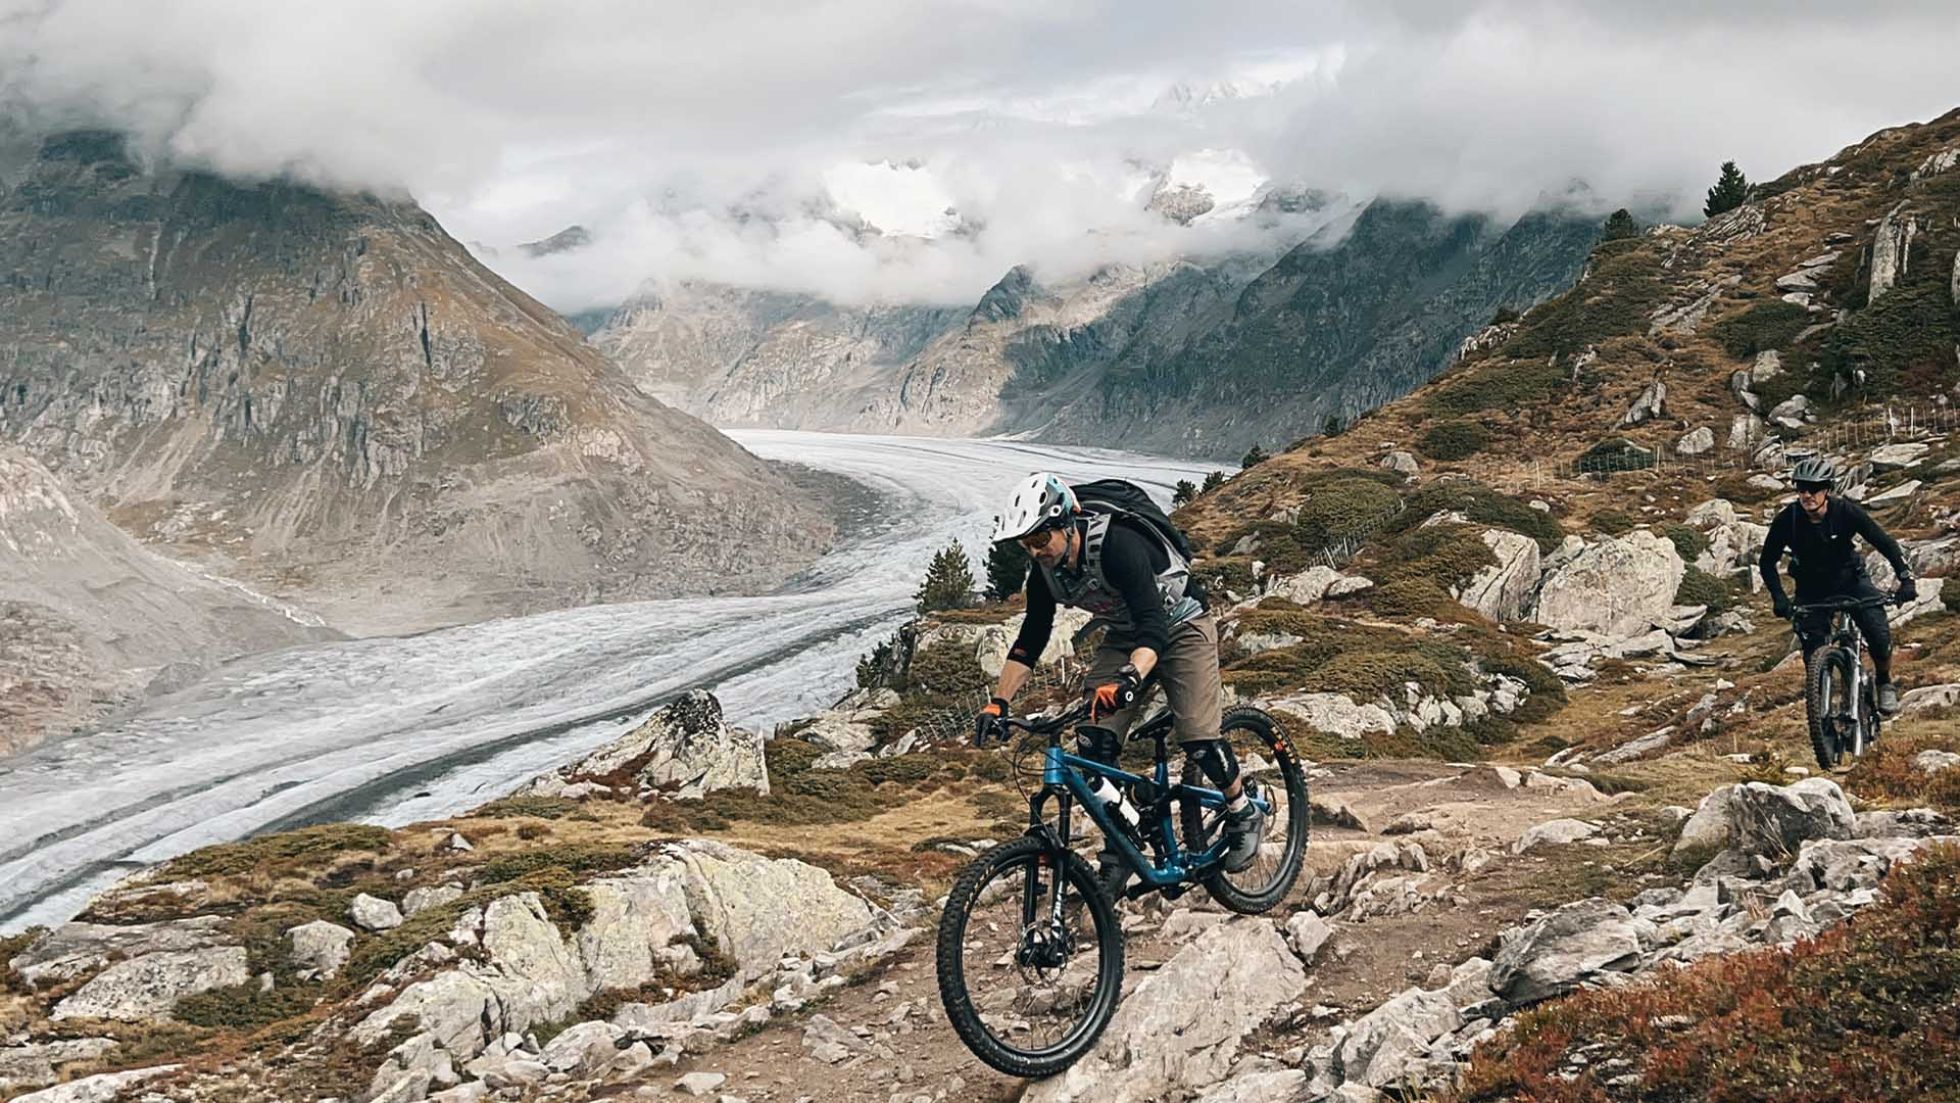 MTB holidays in the swiss Alps